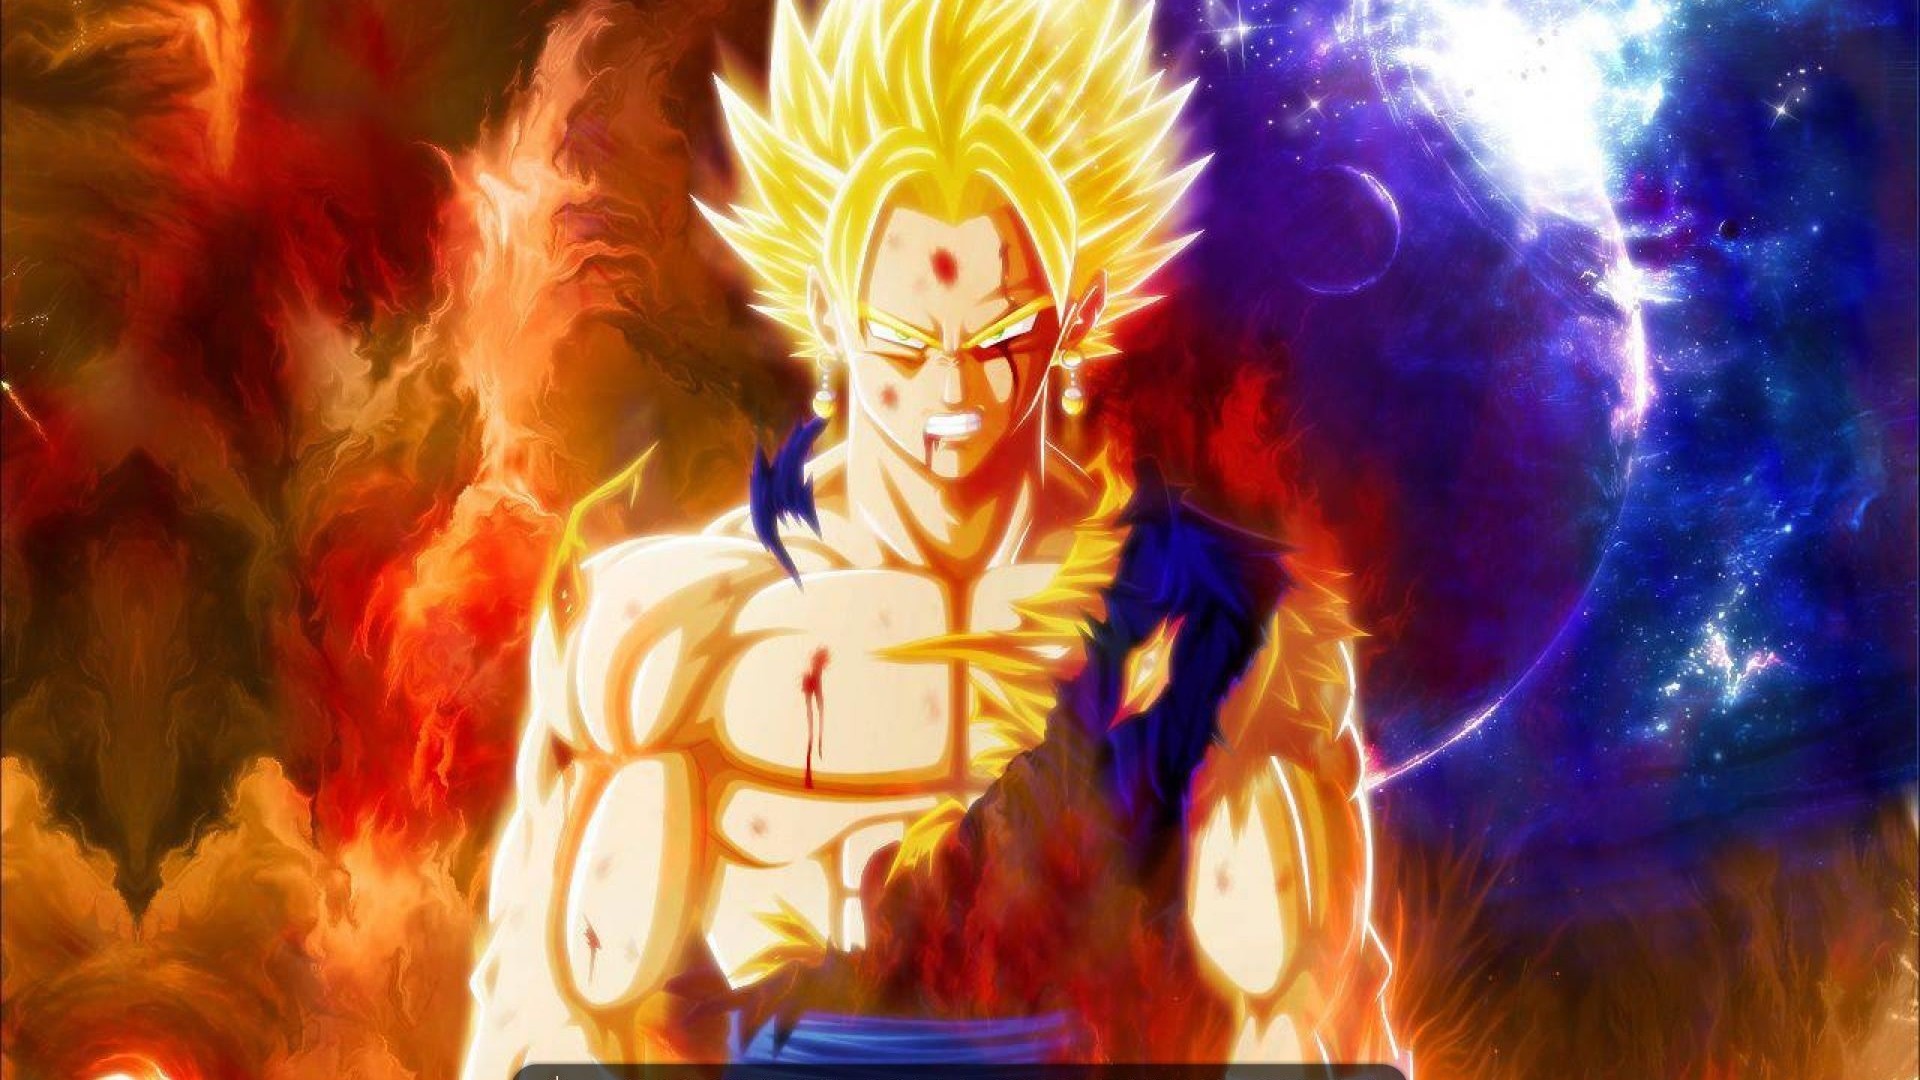 Wallpaper Goku Super Saiyan HD With Resolution 1920X1080 pixel. You can make this wallpaper for your Desktop Computer Backgrounds, Mac Wallpapers, Android Lock screen or iPhone Screensavers